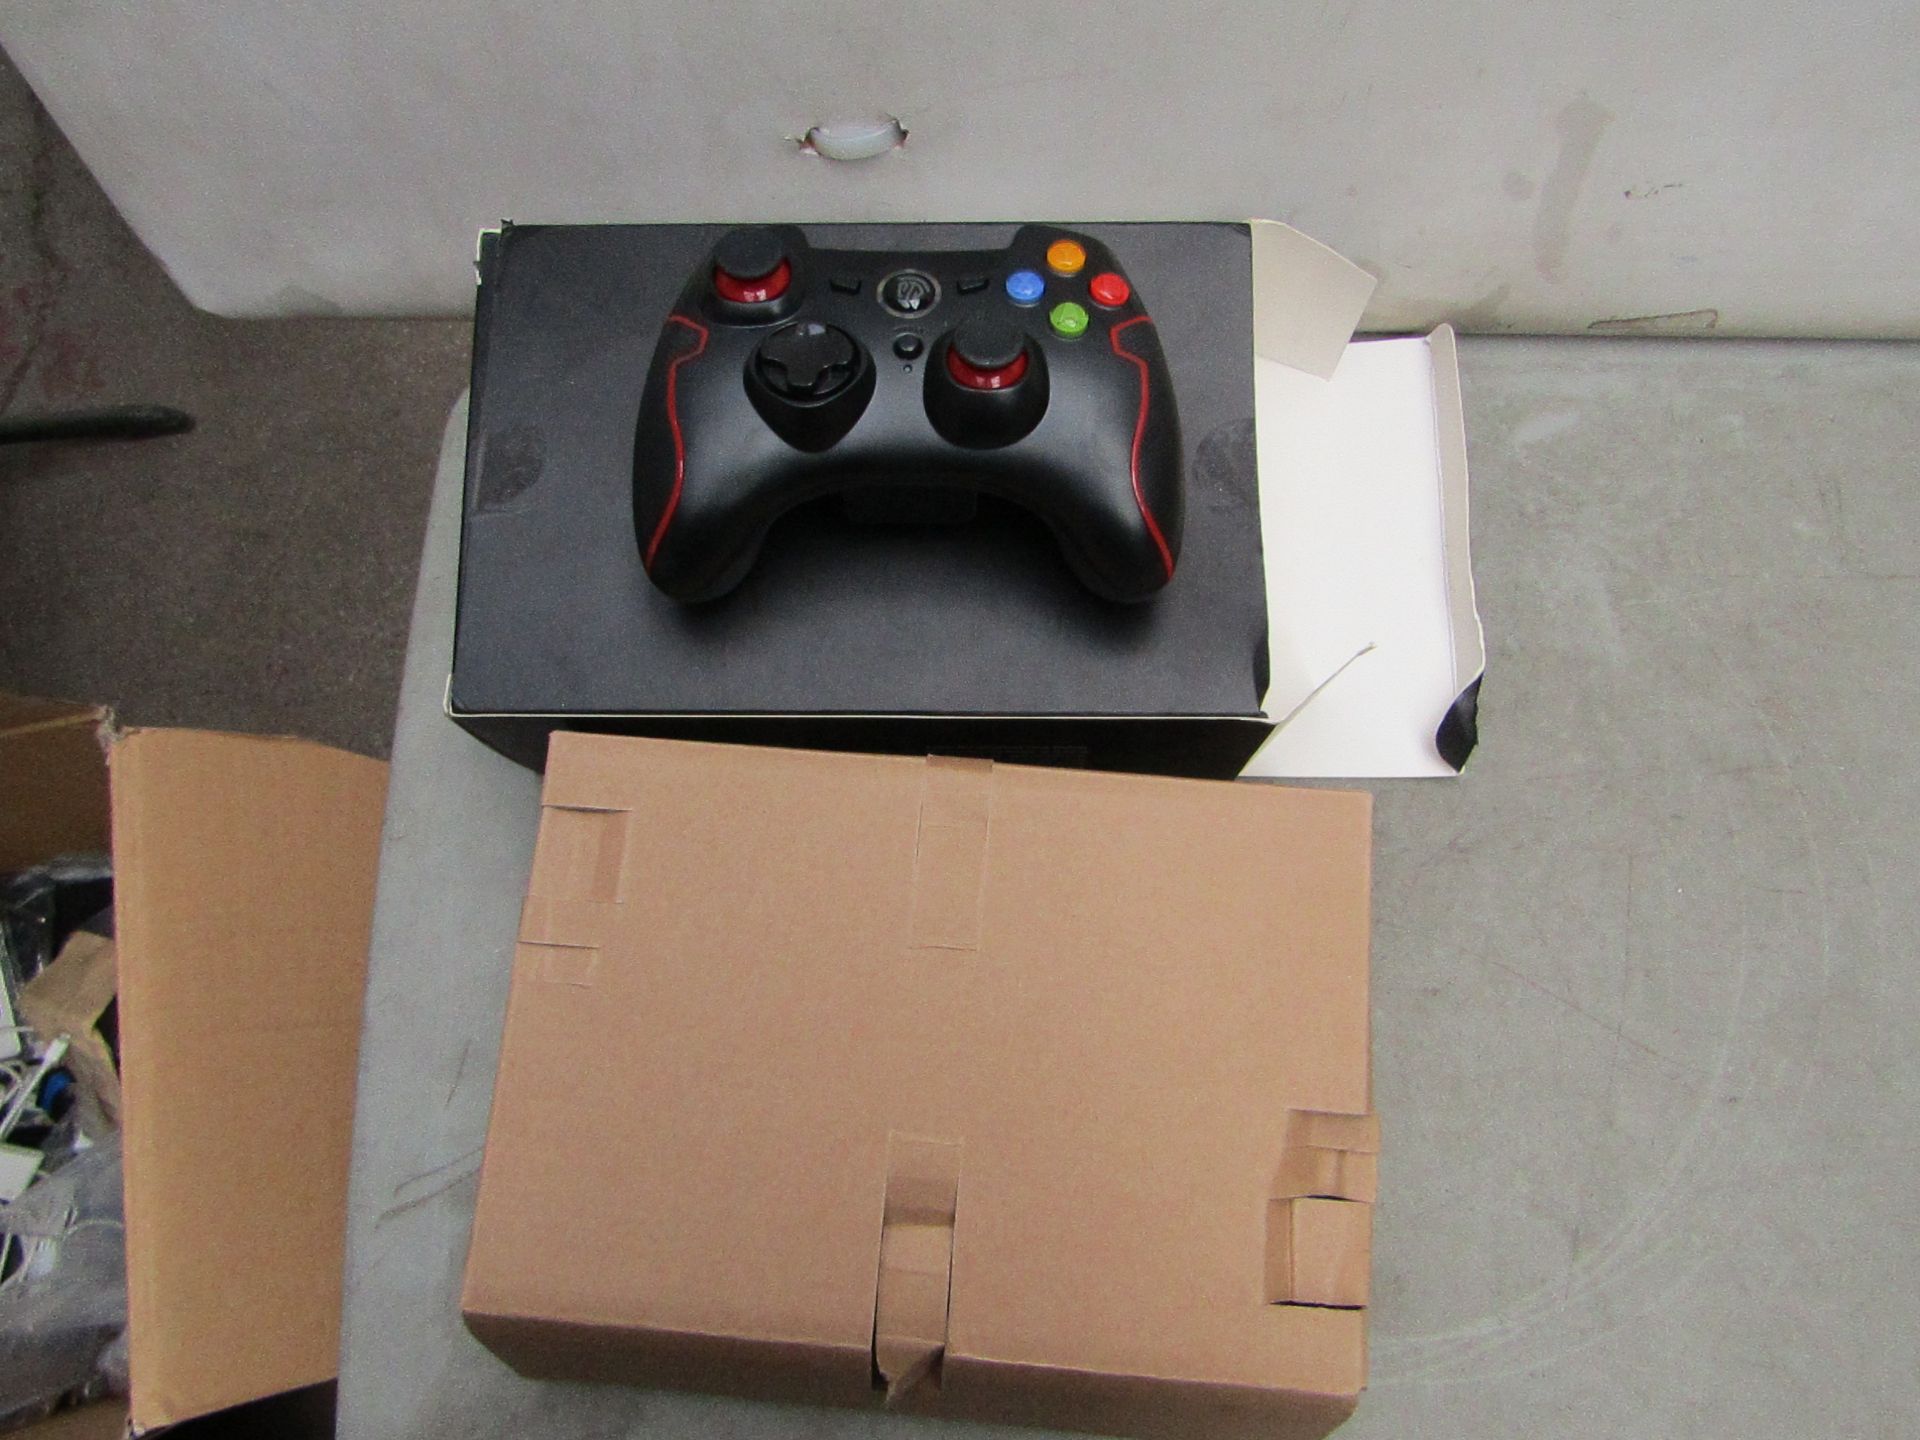 EasySMX - Set Of 2 Controller ( ESM-9013 ) - Look Suitable For XBOX 360 - Unchecked & Boxed.